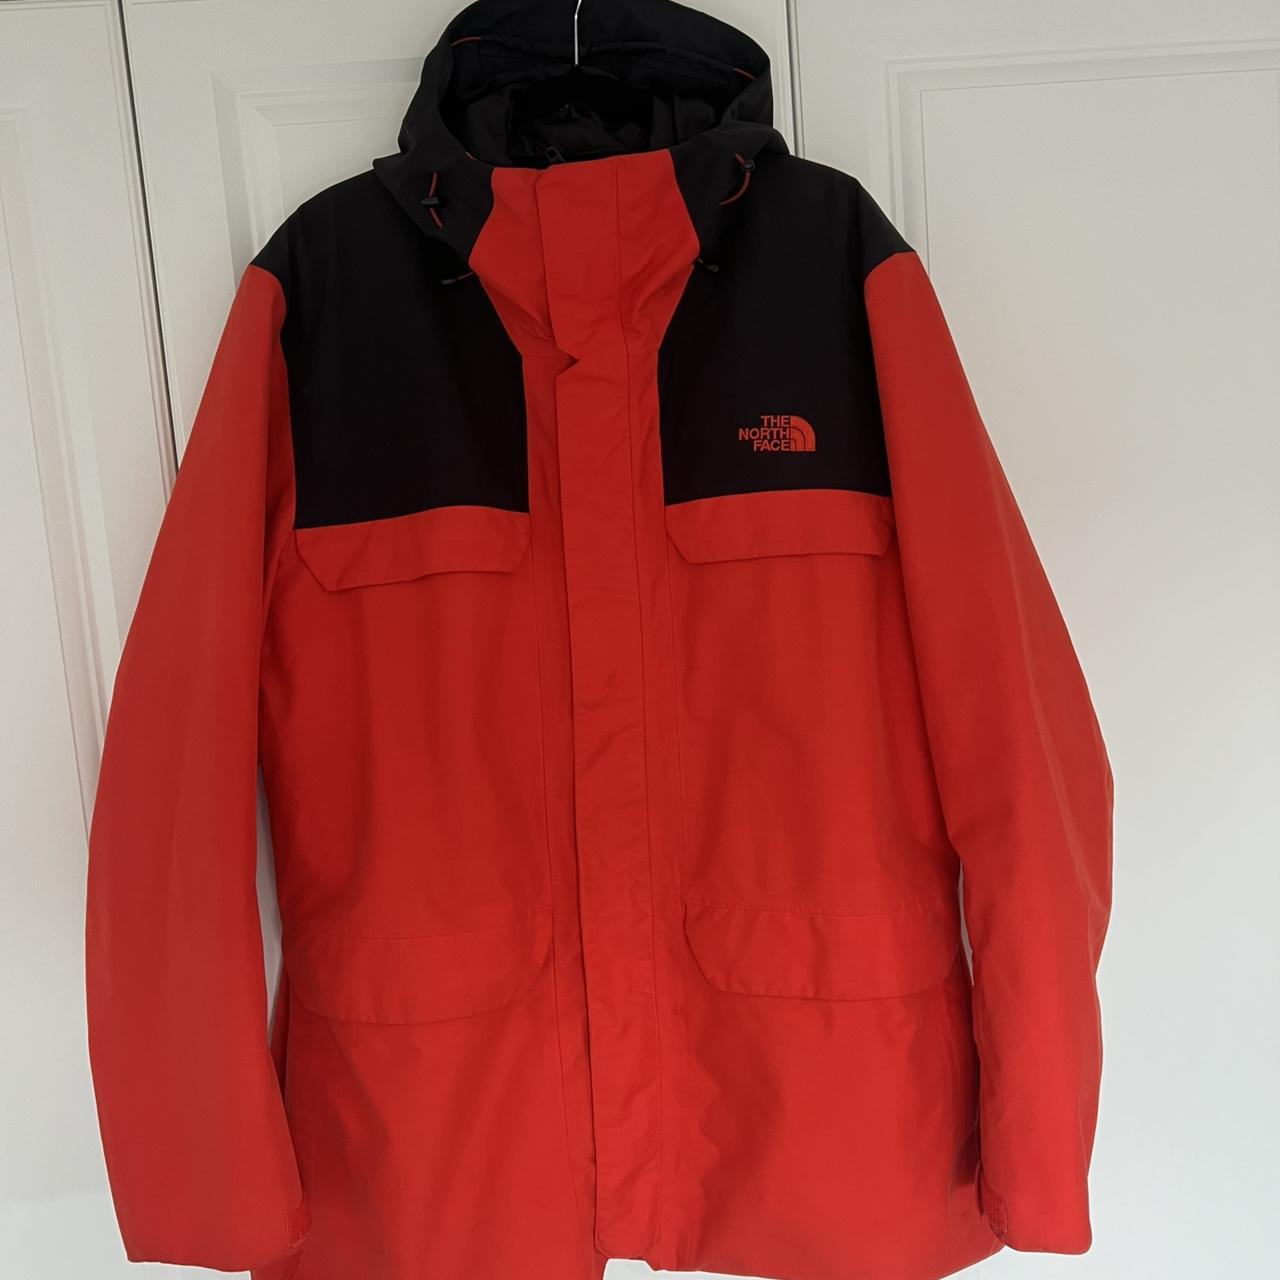 The North Face Men's Black and Red Jacket | Depop